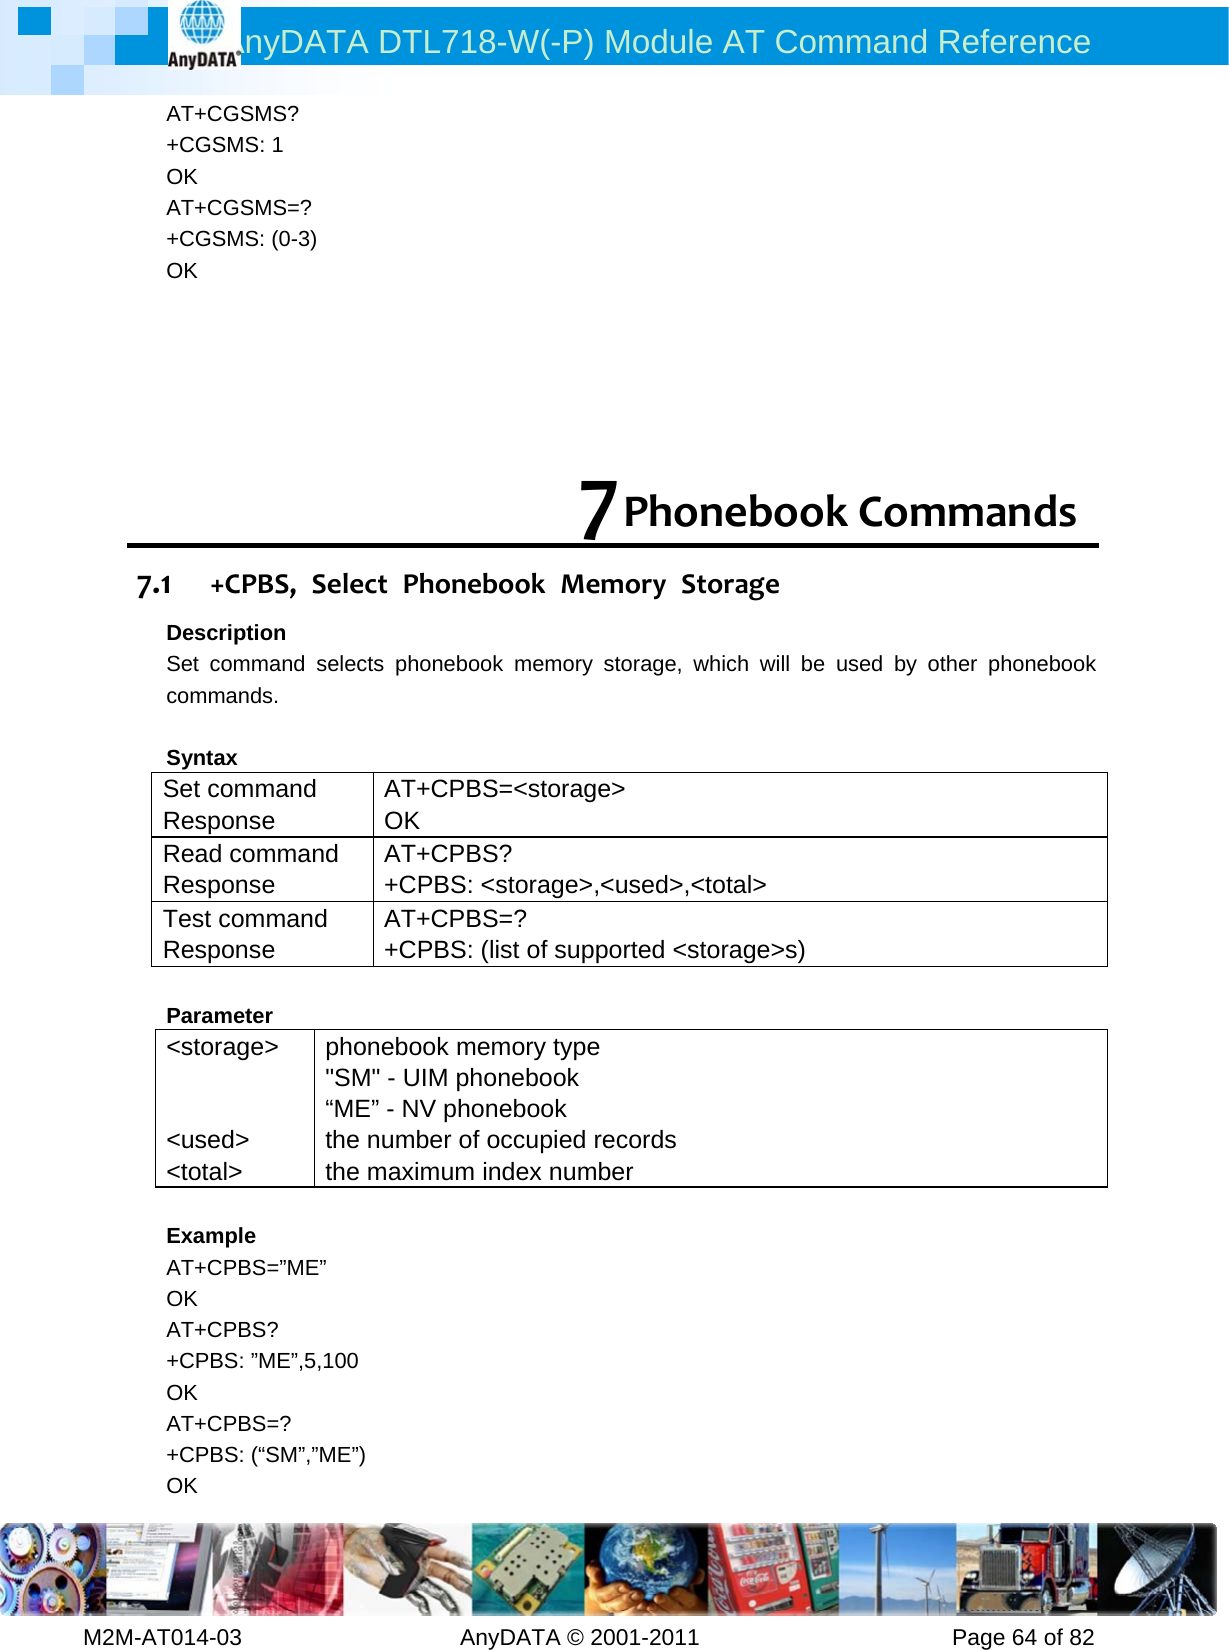 AnyDATA DTL718-W(-P) Module AT Command Reference         M2M-AT014-03                   AnyDATA © 2001-2011                      Page 64 of 82 AT+CGSMS? +CGSMS: 1 OK AT+CGSMS=? +CGSMS: (0-3) OK      7 PhonebookCommands7.1 +CPBS,SelectPhonebookMemoryStorageDescription Set command selects phonebook memory storage, which will be used by other phonebook commands.  Syntax Set command Response AT+CPBS=&lt;storage&gt; OK Read command Response AT+CPBS?  +CPBS: &lt;storage&gt;,&lt;used&gt;,&lt;total&gt; Test command Response AT+CPBS=?  +CPBS: (list of supported &lt;storage&gt;s)    Parameter &lt;storage&gt;   &lt;used&gt; &lt;total&gt; phonebook memory type &quot;SM&quot; - UIM phonebook “ME” - NV phonebook   the number of occupied records   the maximum index number  Example AT+CPBS=”ME” OK AT+CPBS? +CPBS: ”ME”,5,100 OK AT+CPBS=? +CPBS: (“SM”,”ME”) OK 